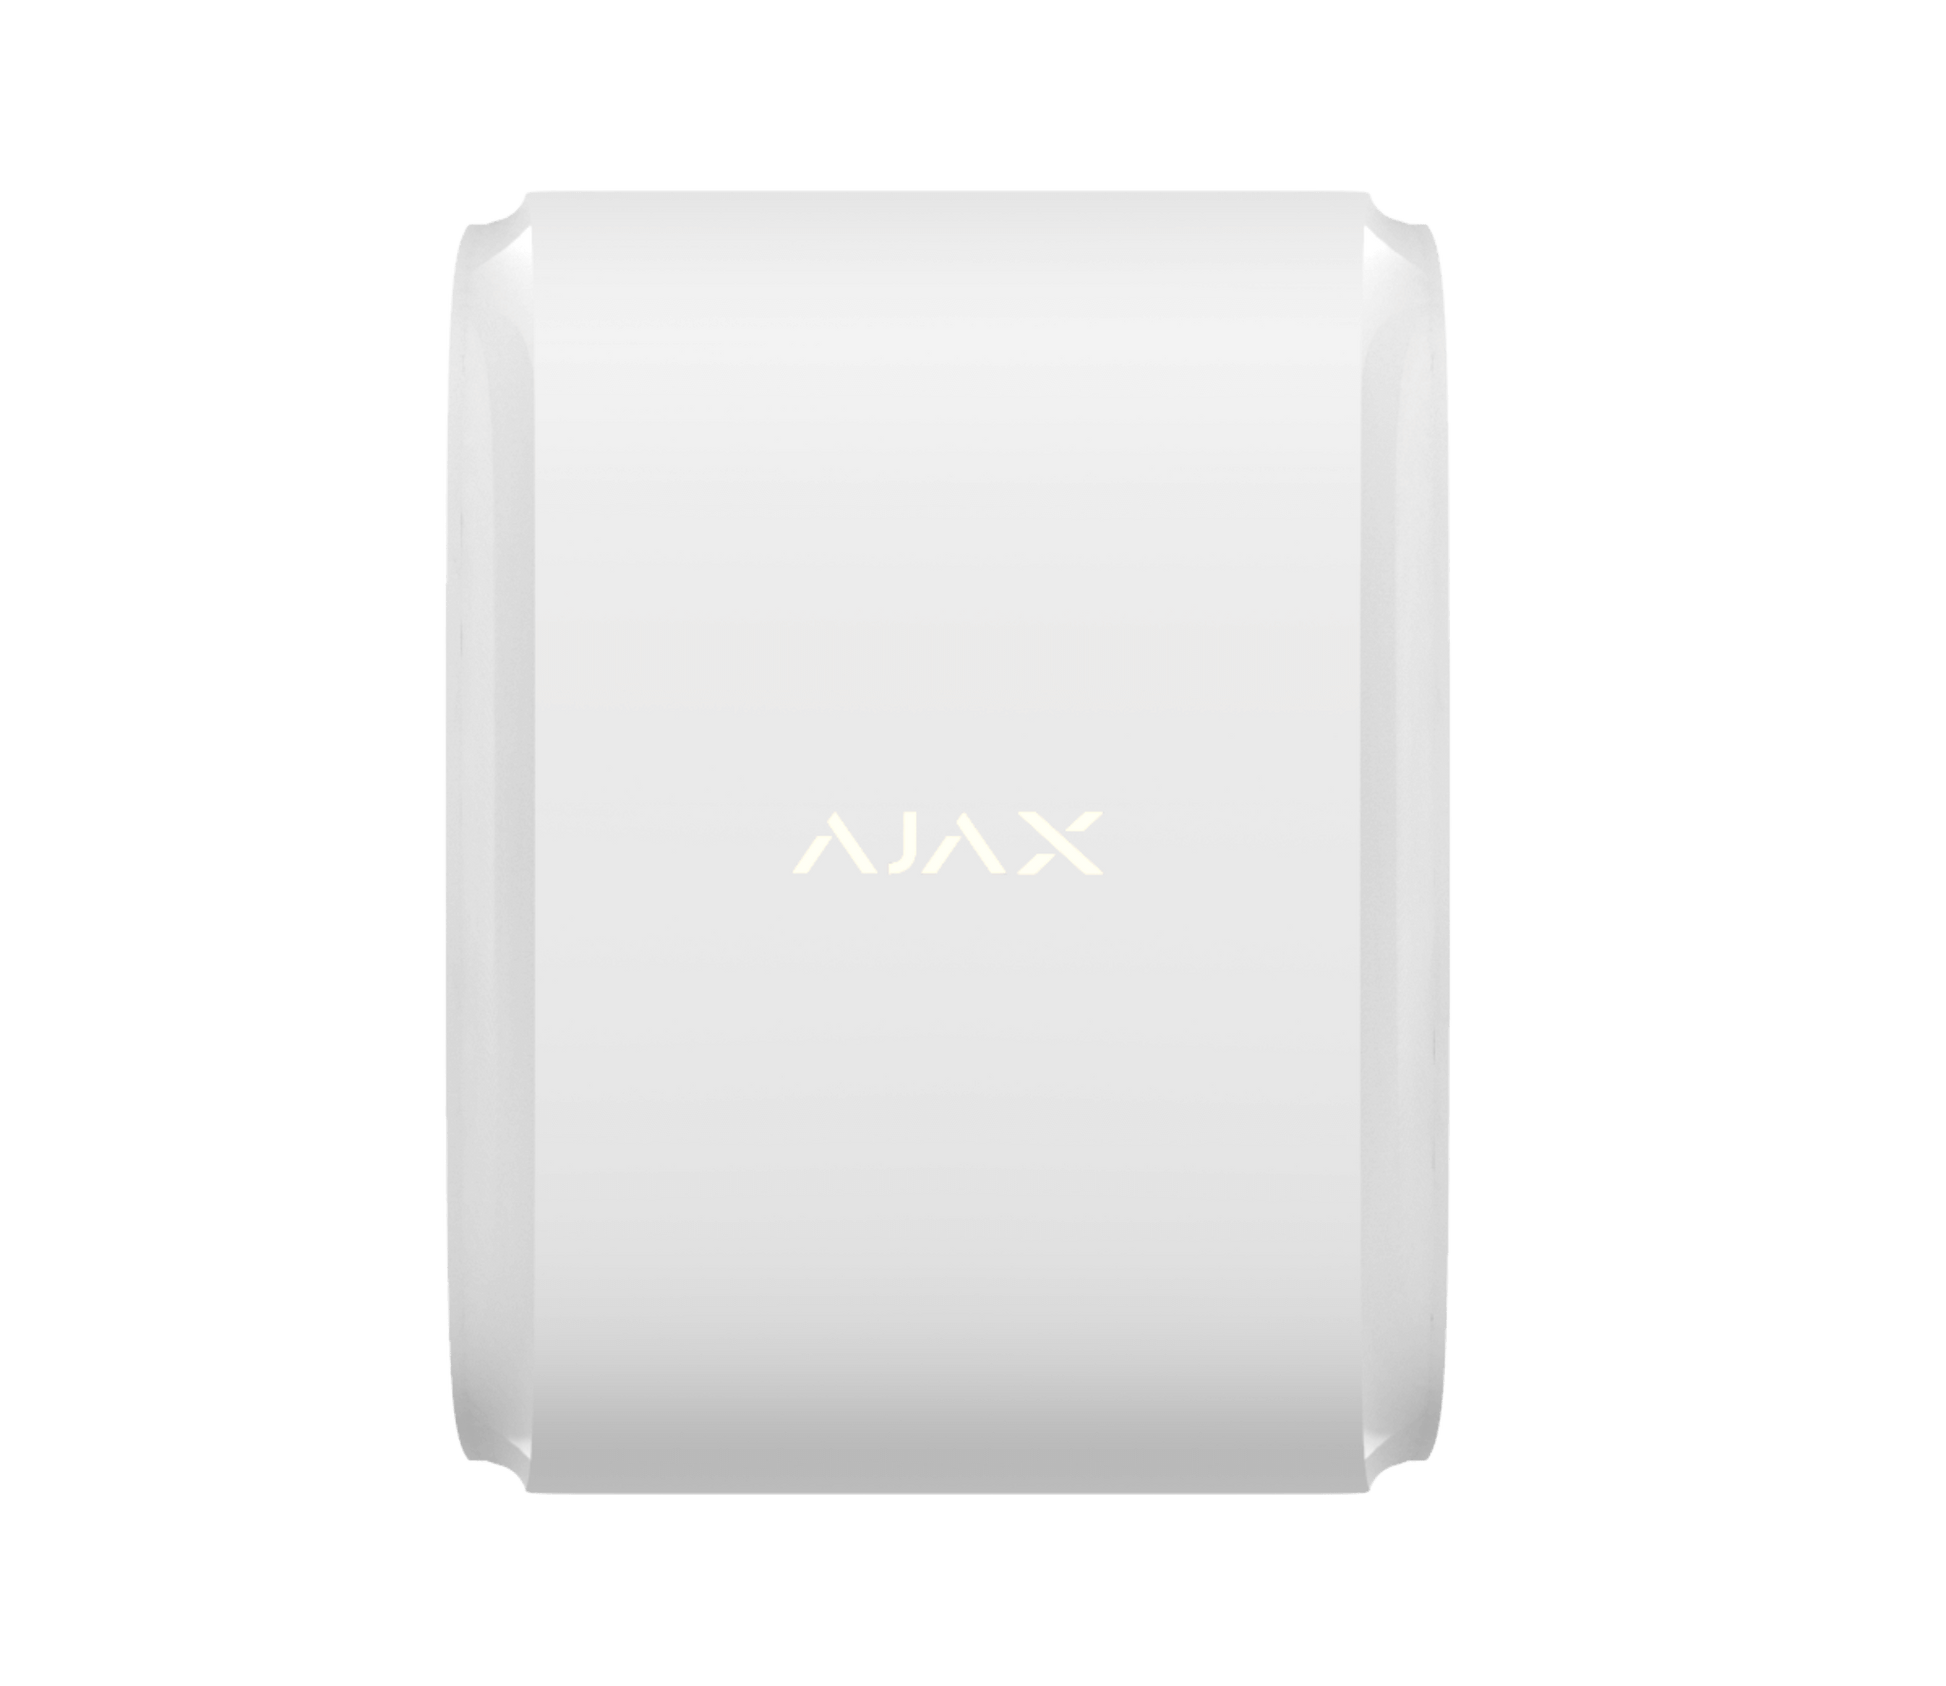 White Ajax dual curtain outdoor motion sensor , front view for home and business security